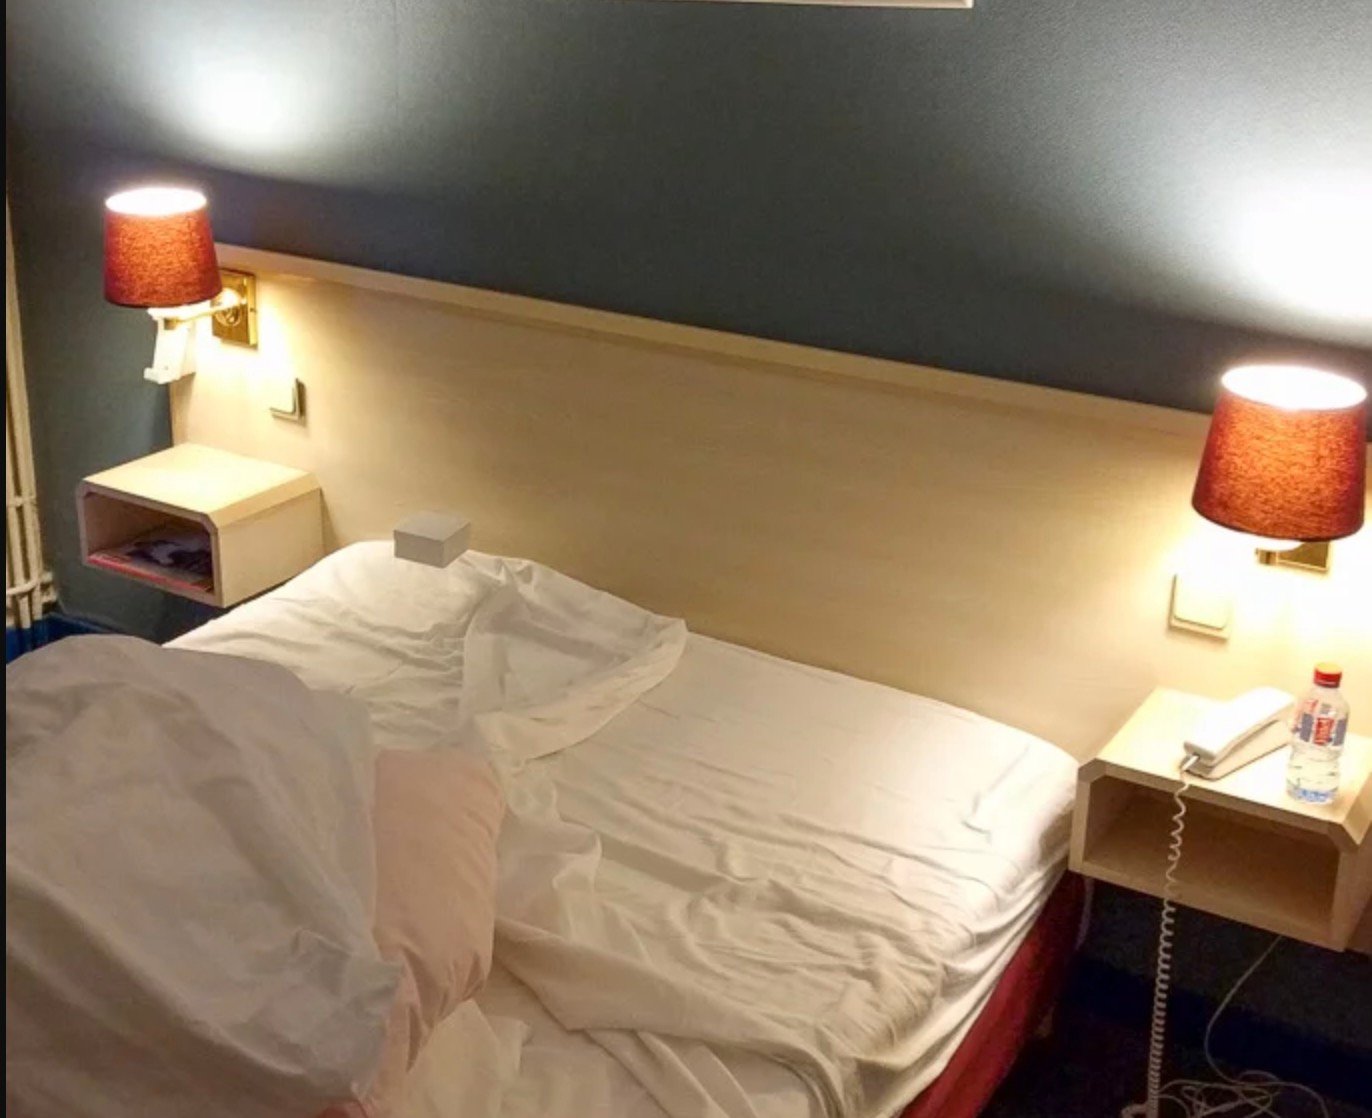 Travel Tips What To Do If Your Hotel Has Bed Bugs,What Goes With Purple And Green